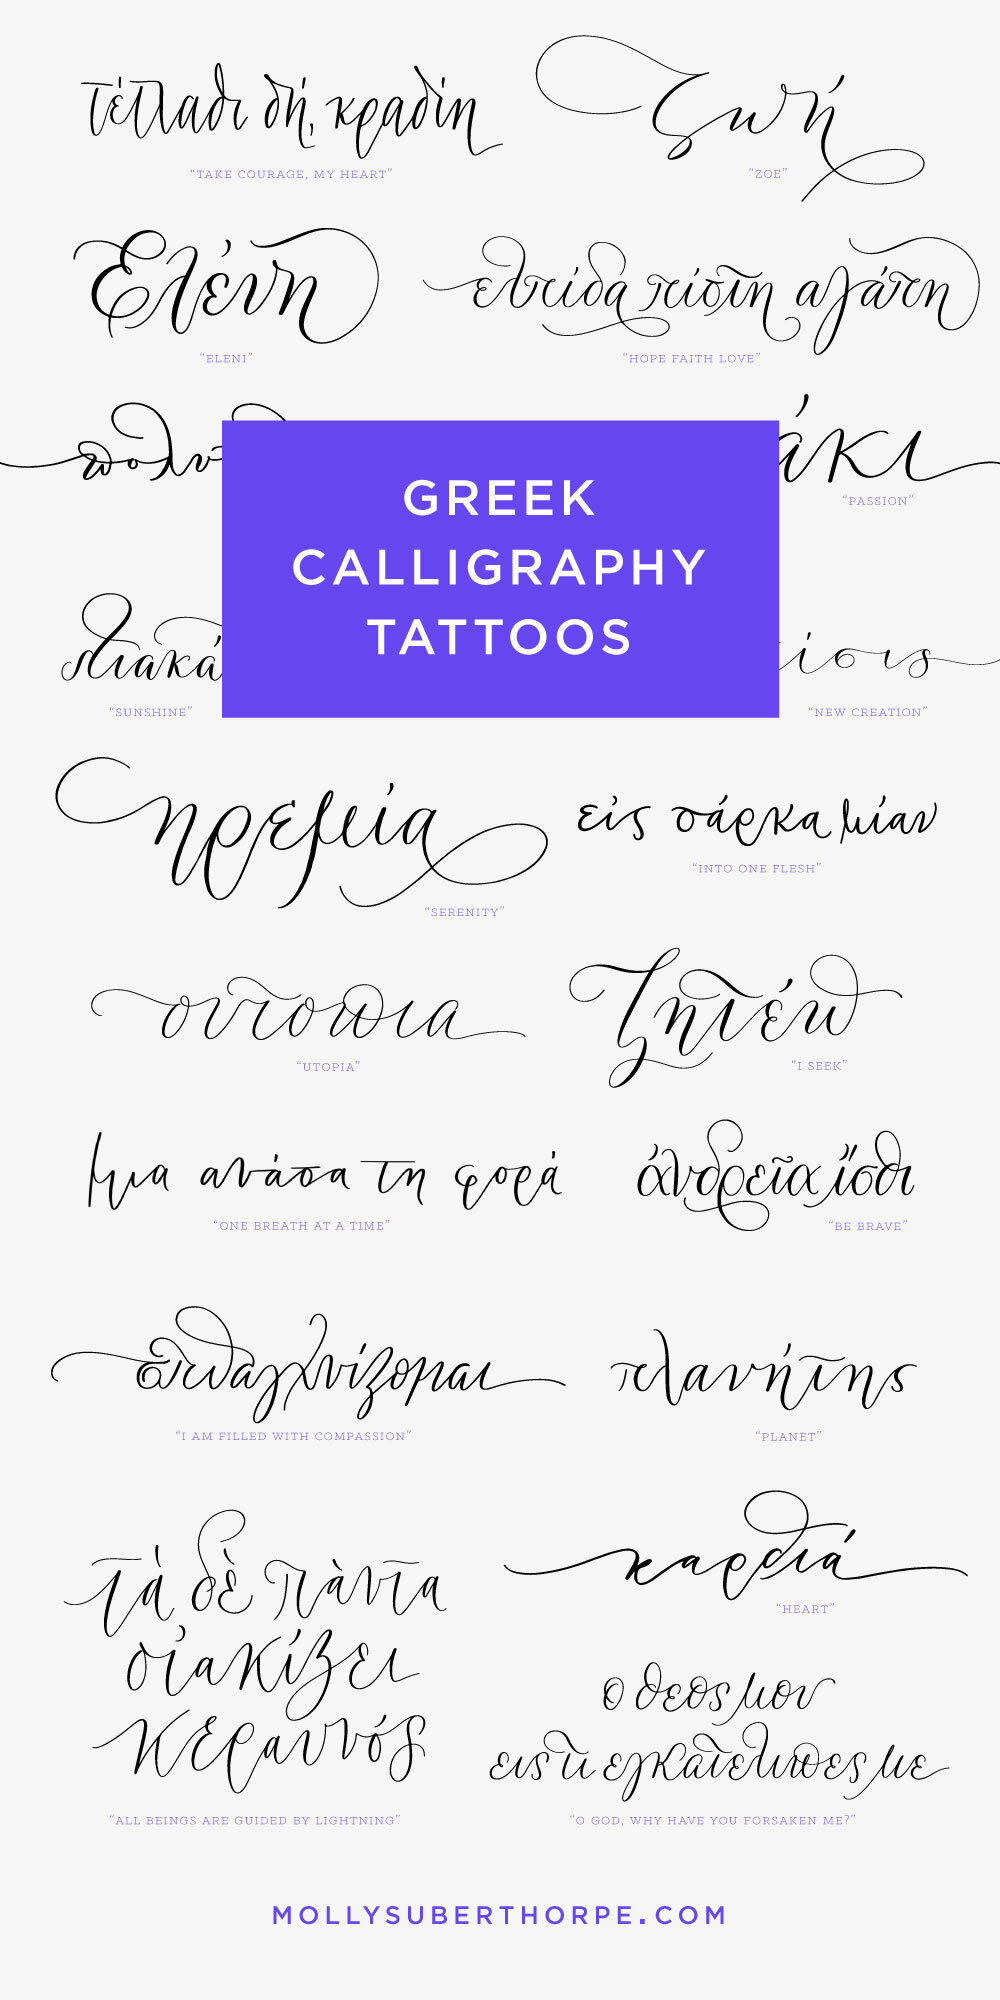 What are some of the best calligraphy tattoo ideas  Quora